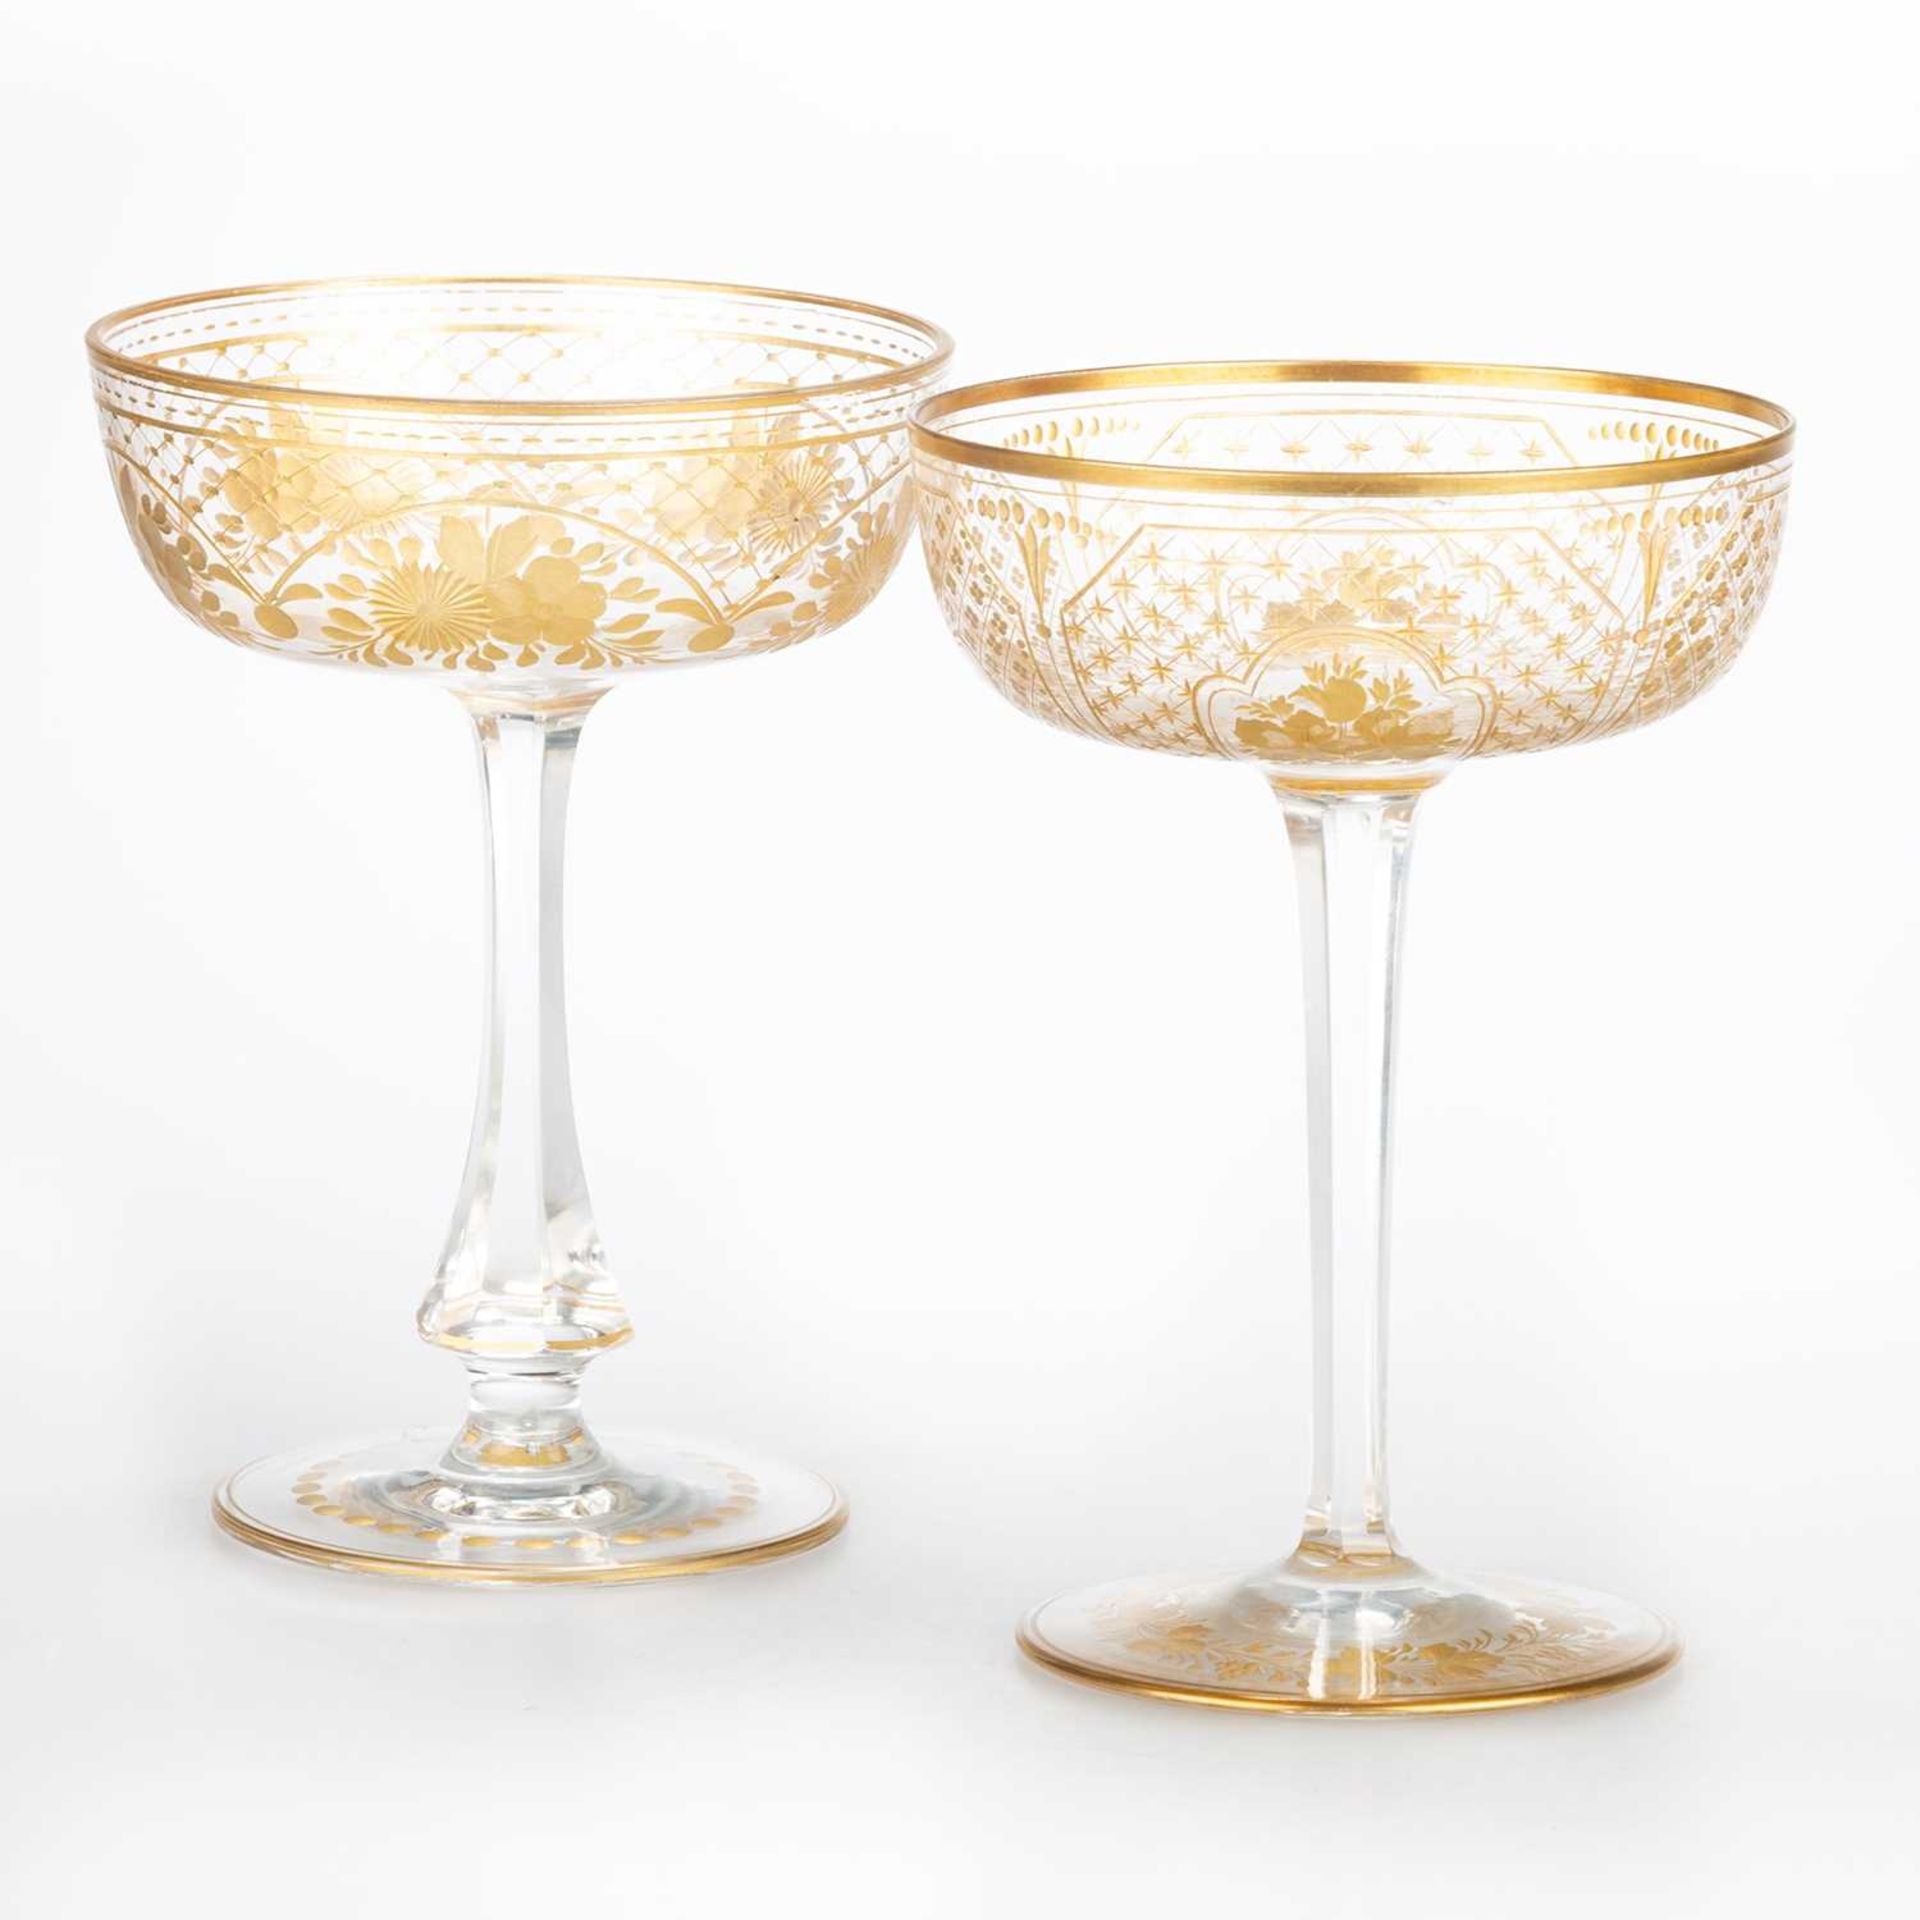 A COLLECTION OF GILDED GLASS, PROBABLY BY MOSER, 19TH CENTURY - Image 2 of 4